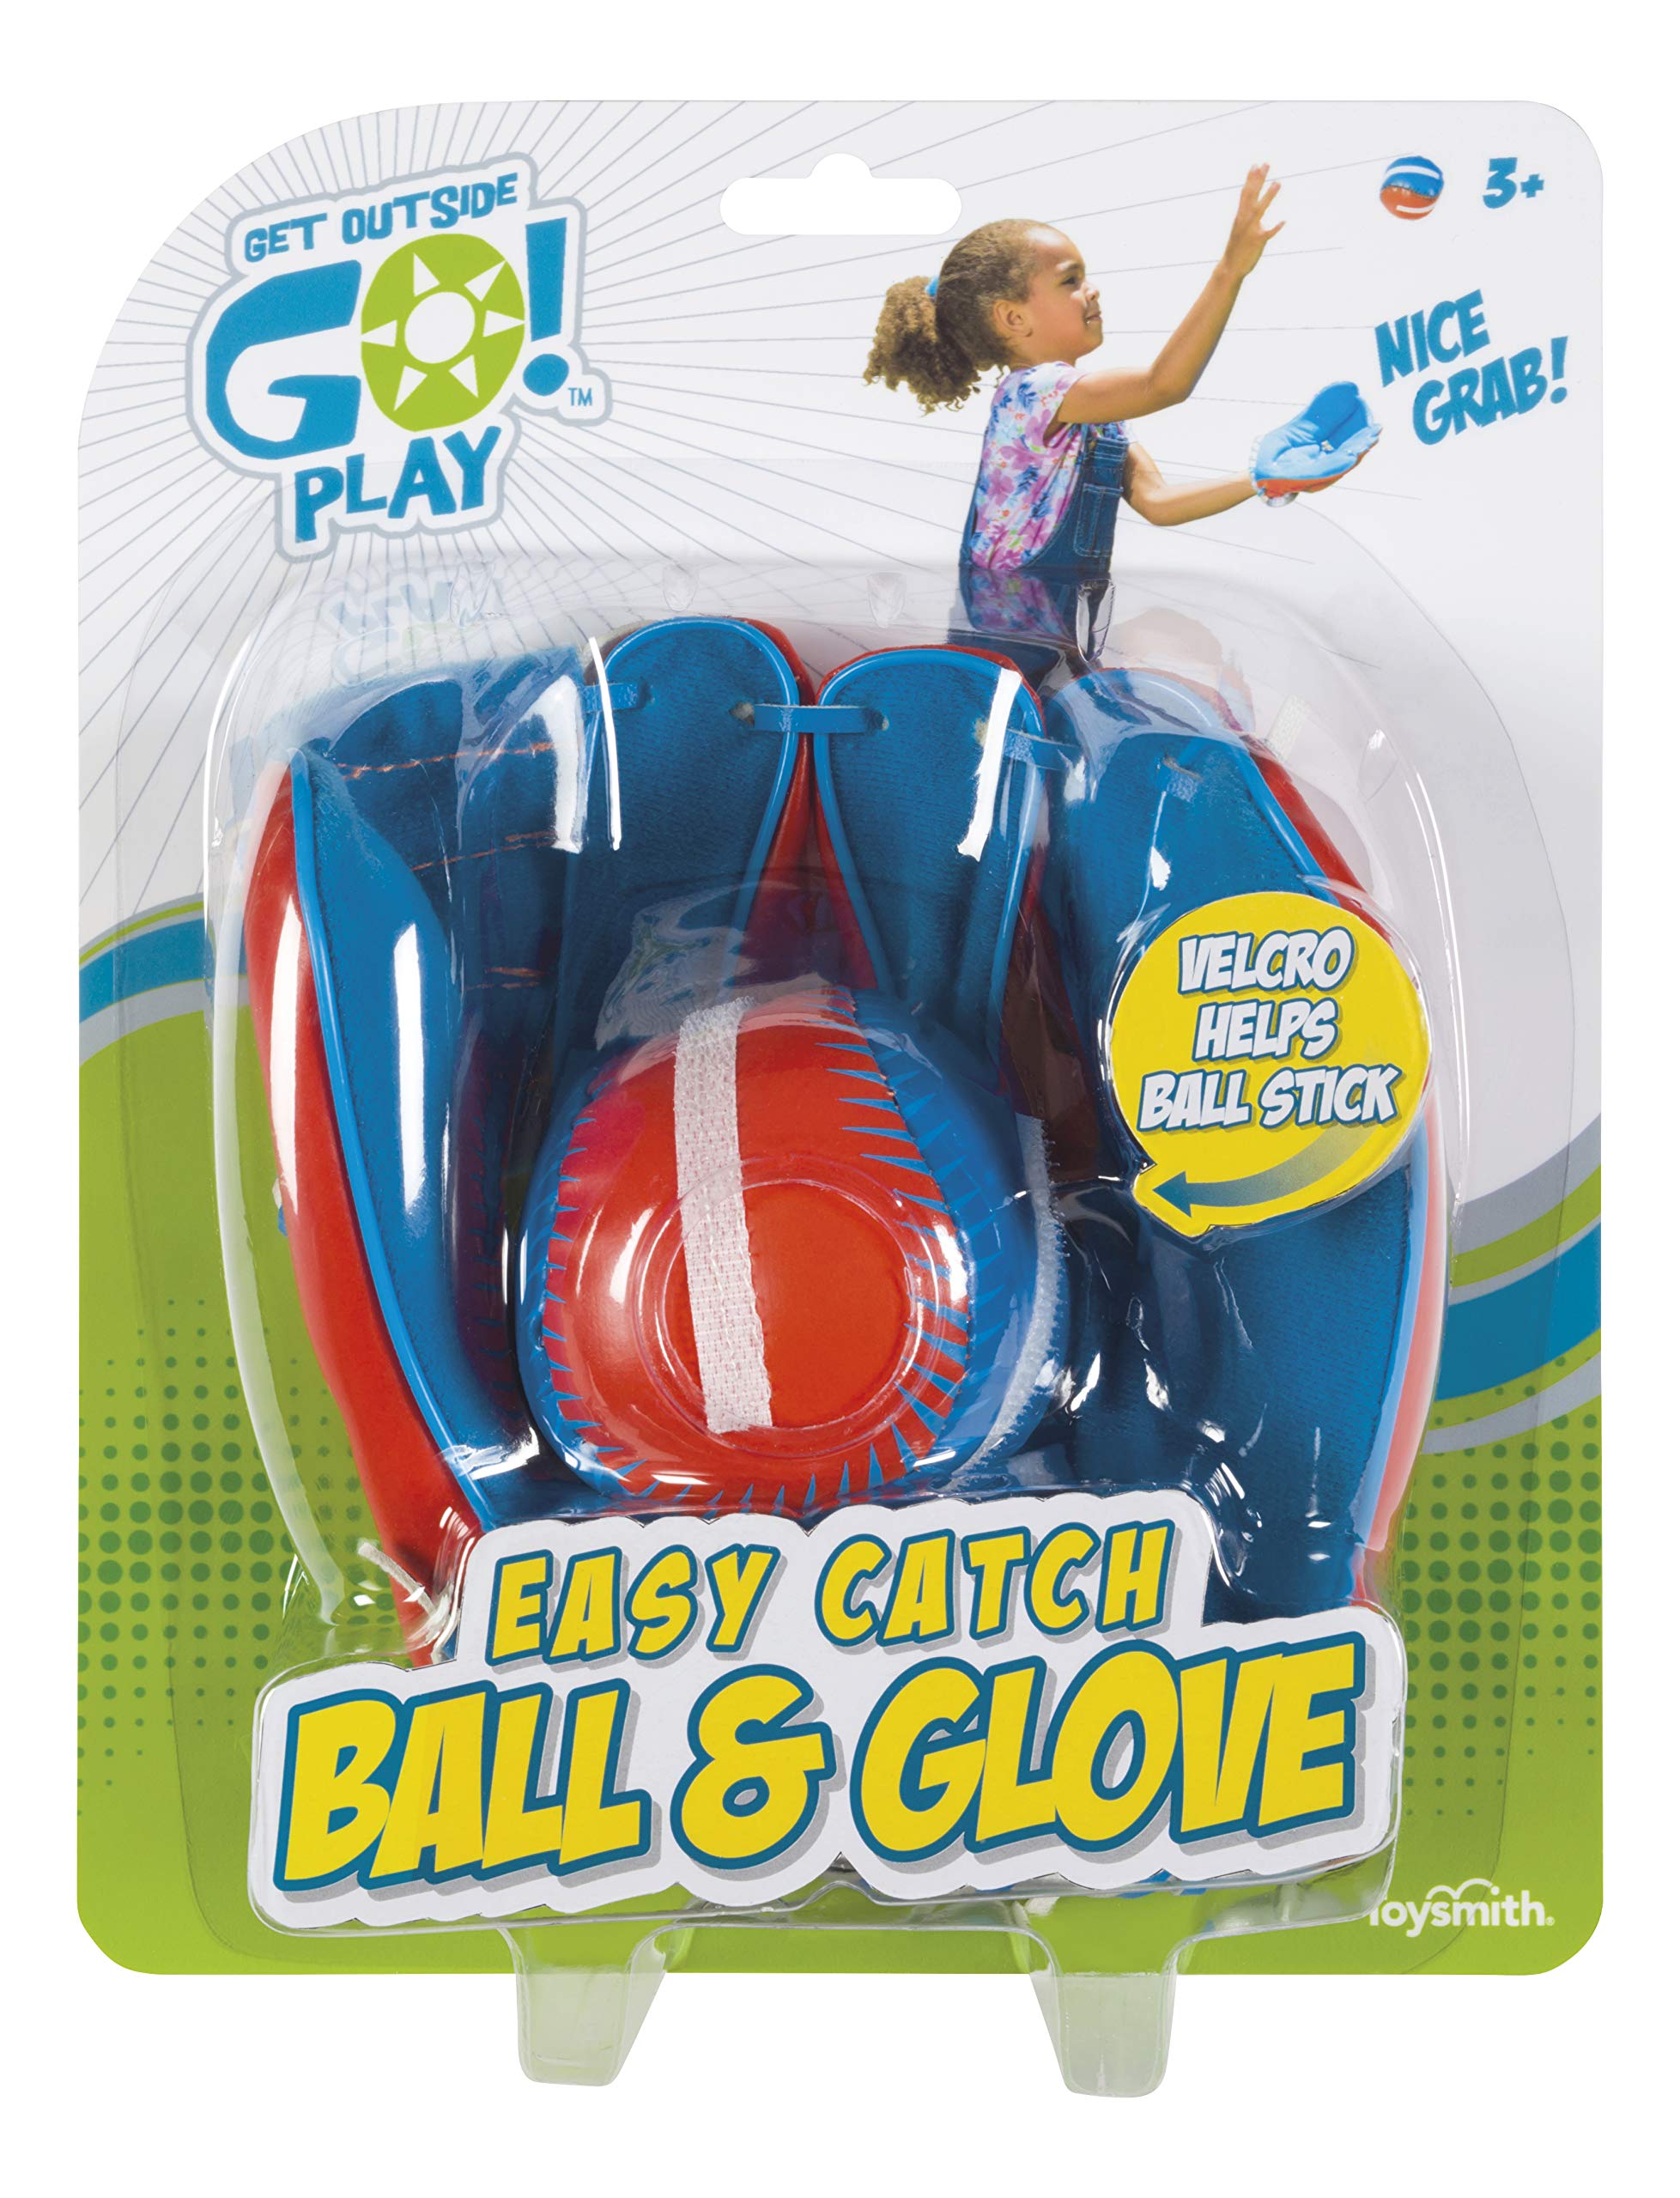 Get Outside Go! Easy Catch Ball & Glove Set Super Sport Outdoor Active Play Baseball by Toysmith (Packaging May Vary)